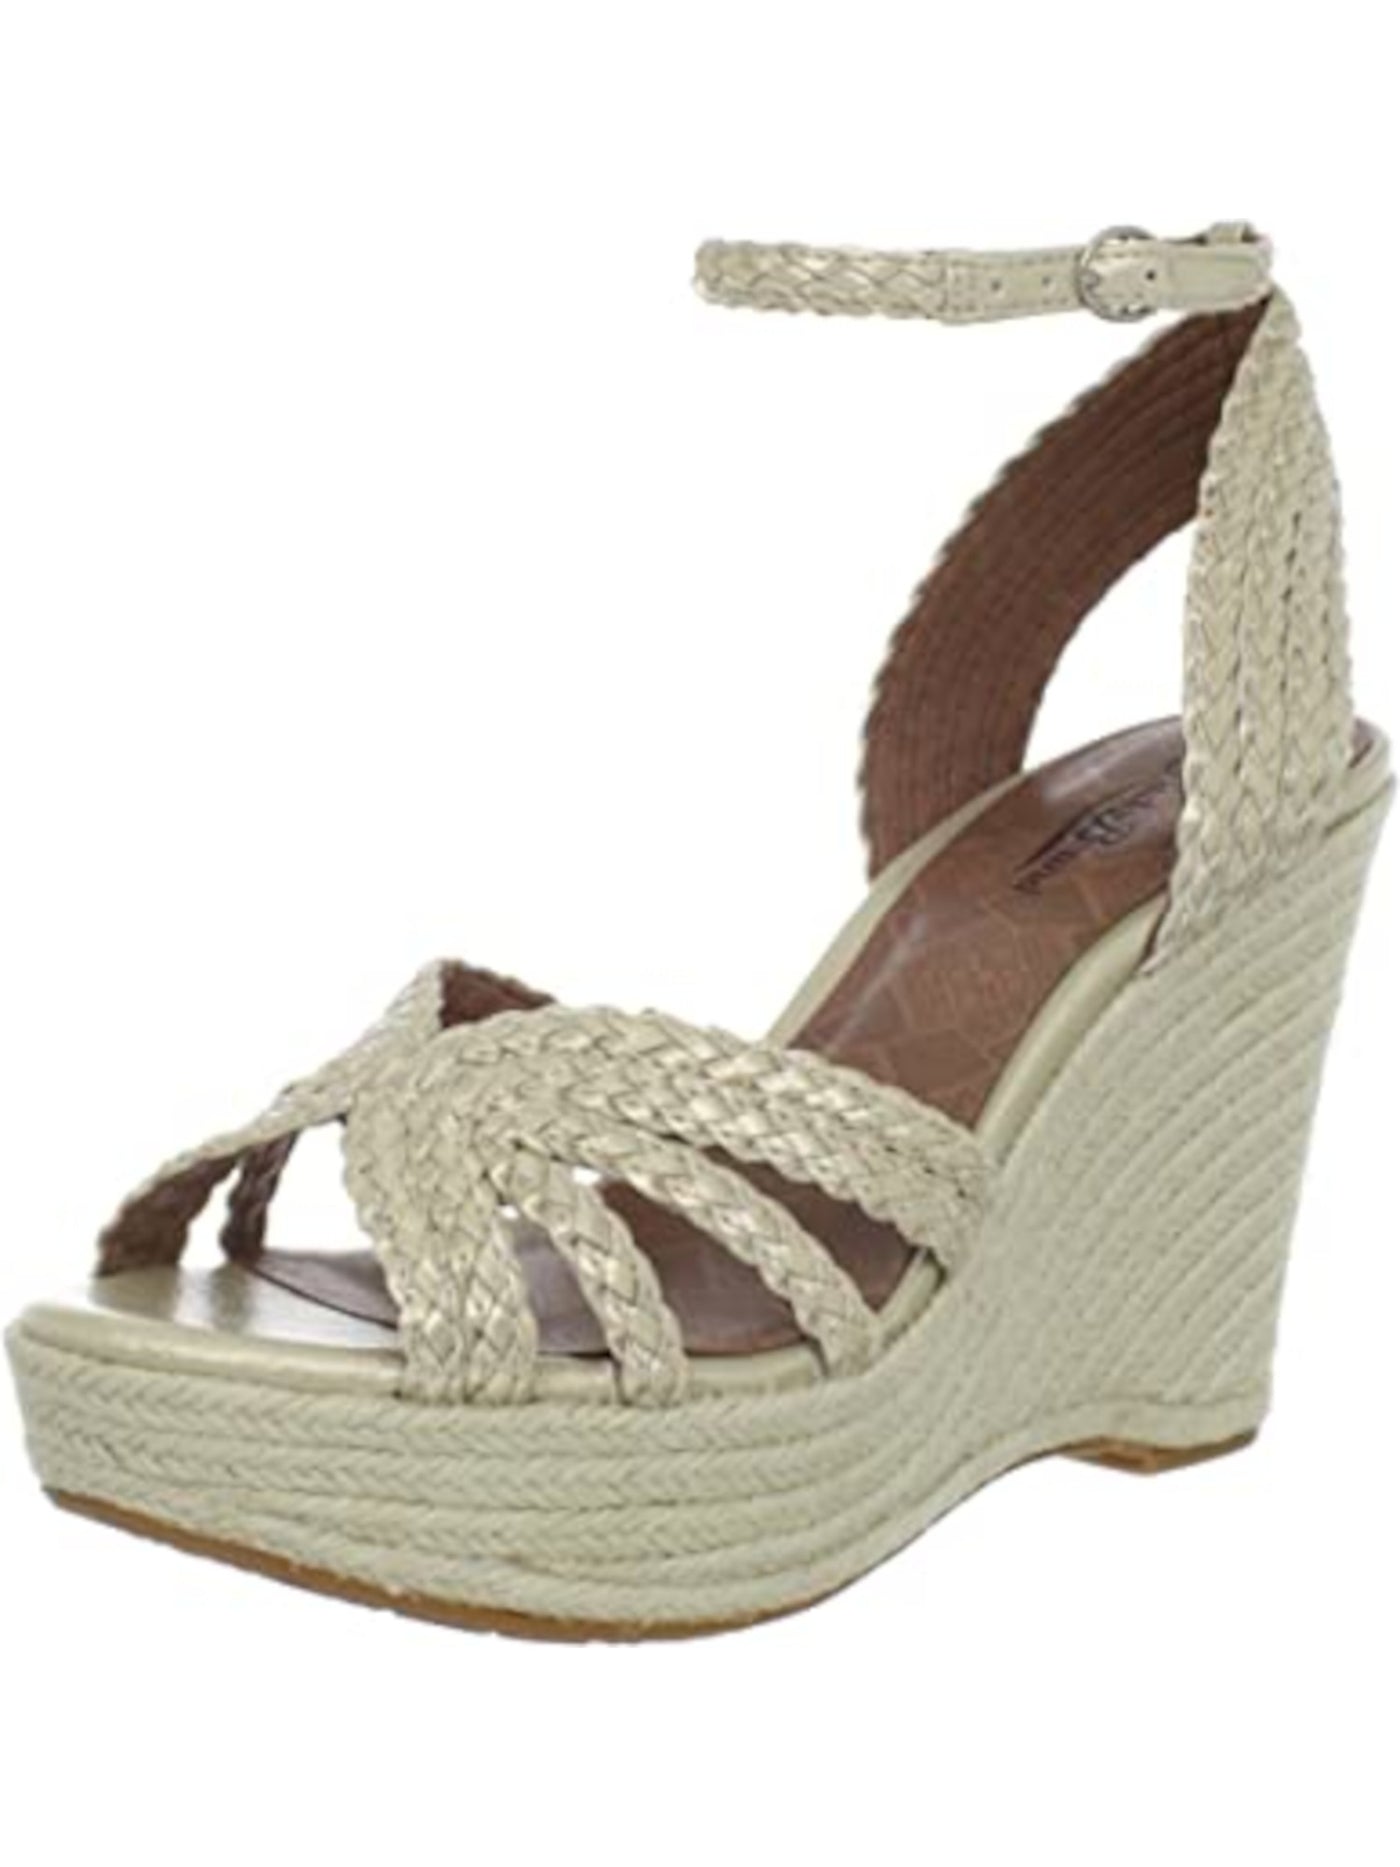 LUCKY BRAND Womens Beige 1-1/2" Platform Ankle Strap Braided Lainey Round Toe Wedge Buckle Espadrille Shoes 11 M